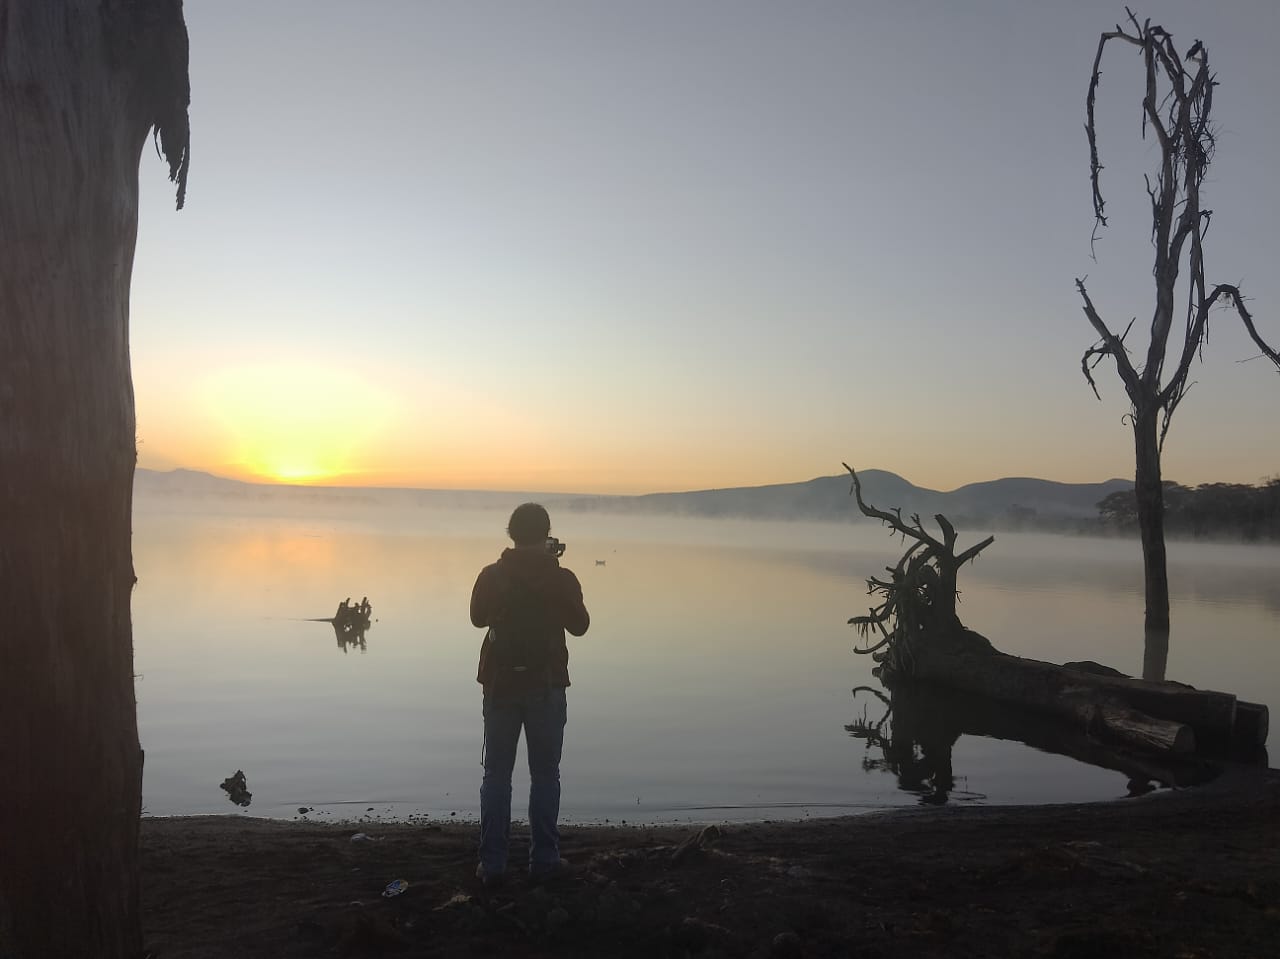 A silhouette of a man and trees at a silvery lakeshore at dawn with orange sky